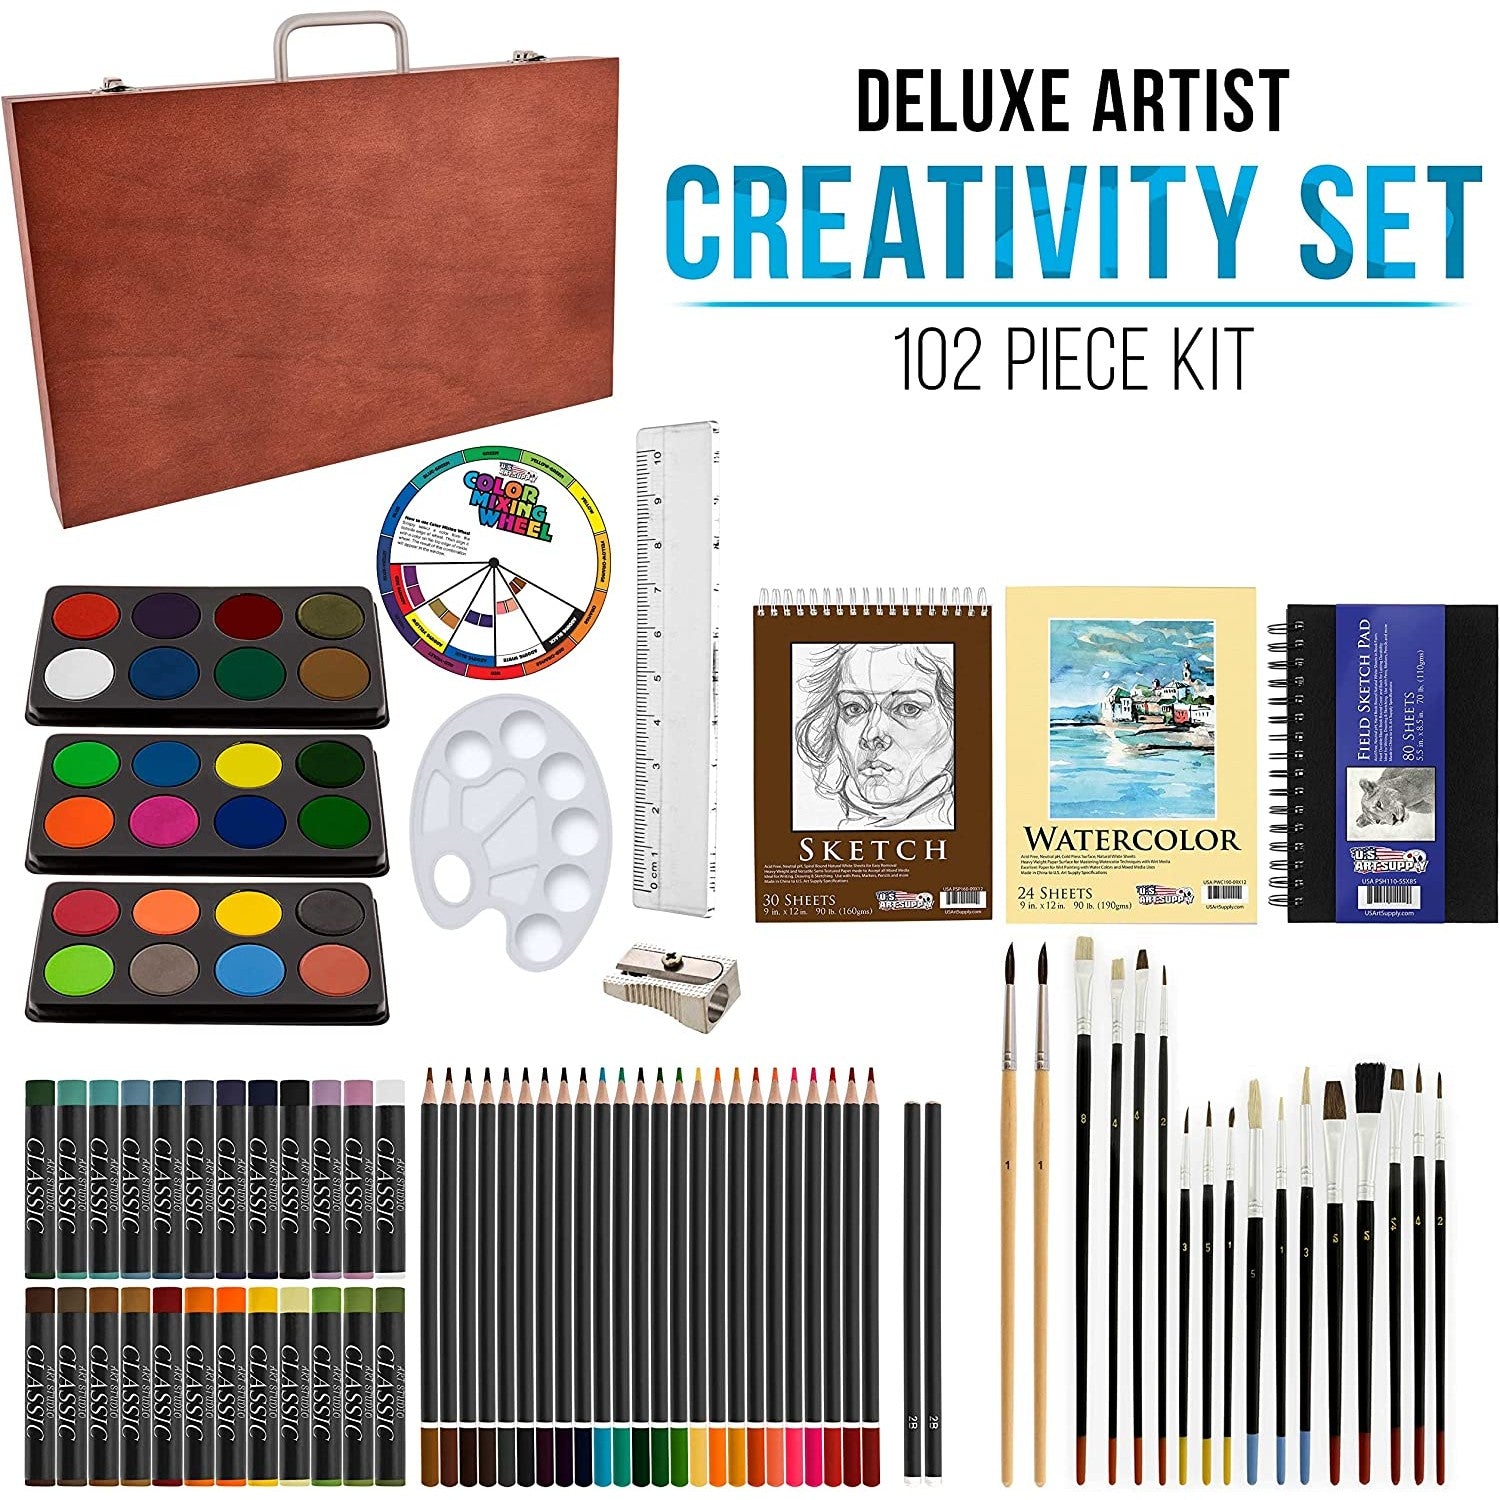 A 102 piece artist drawing set which includes a wooden case. There is text which reads, 'Deluxe artist creativity set 102 piece kit.'